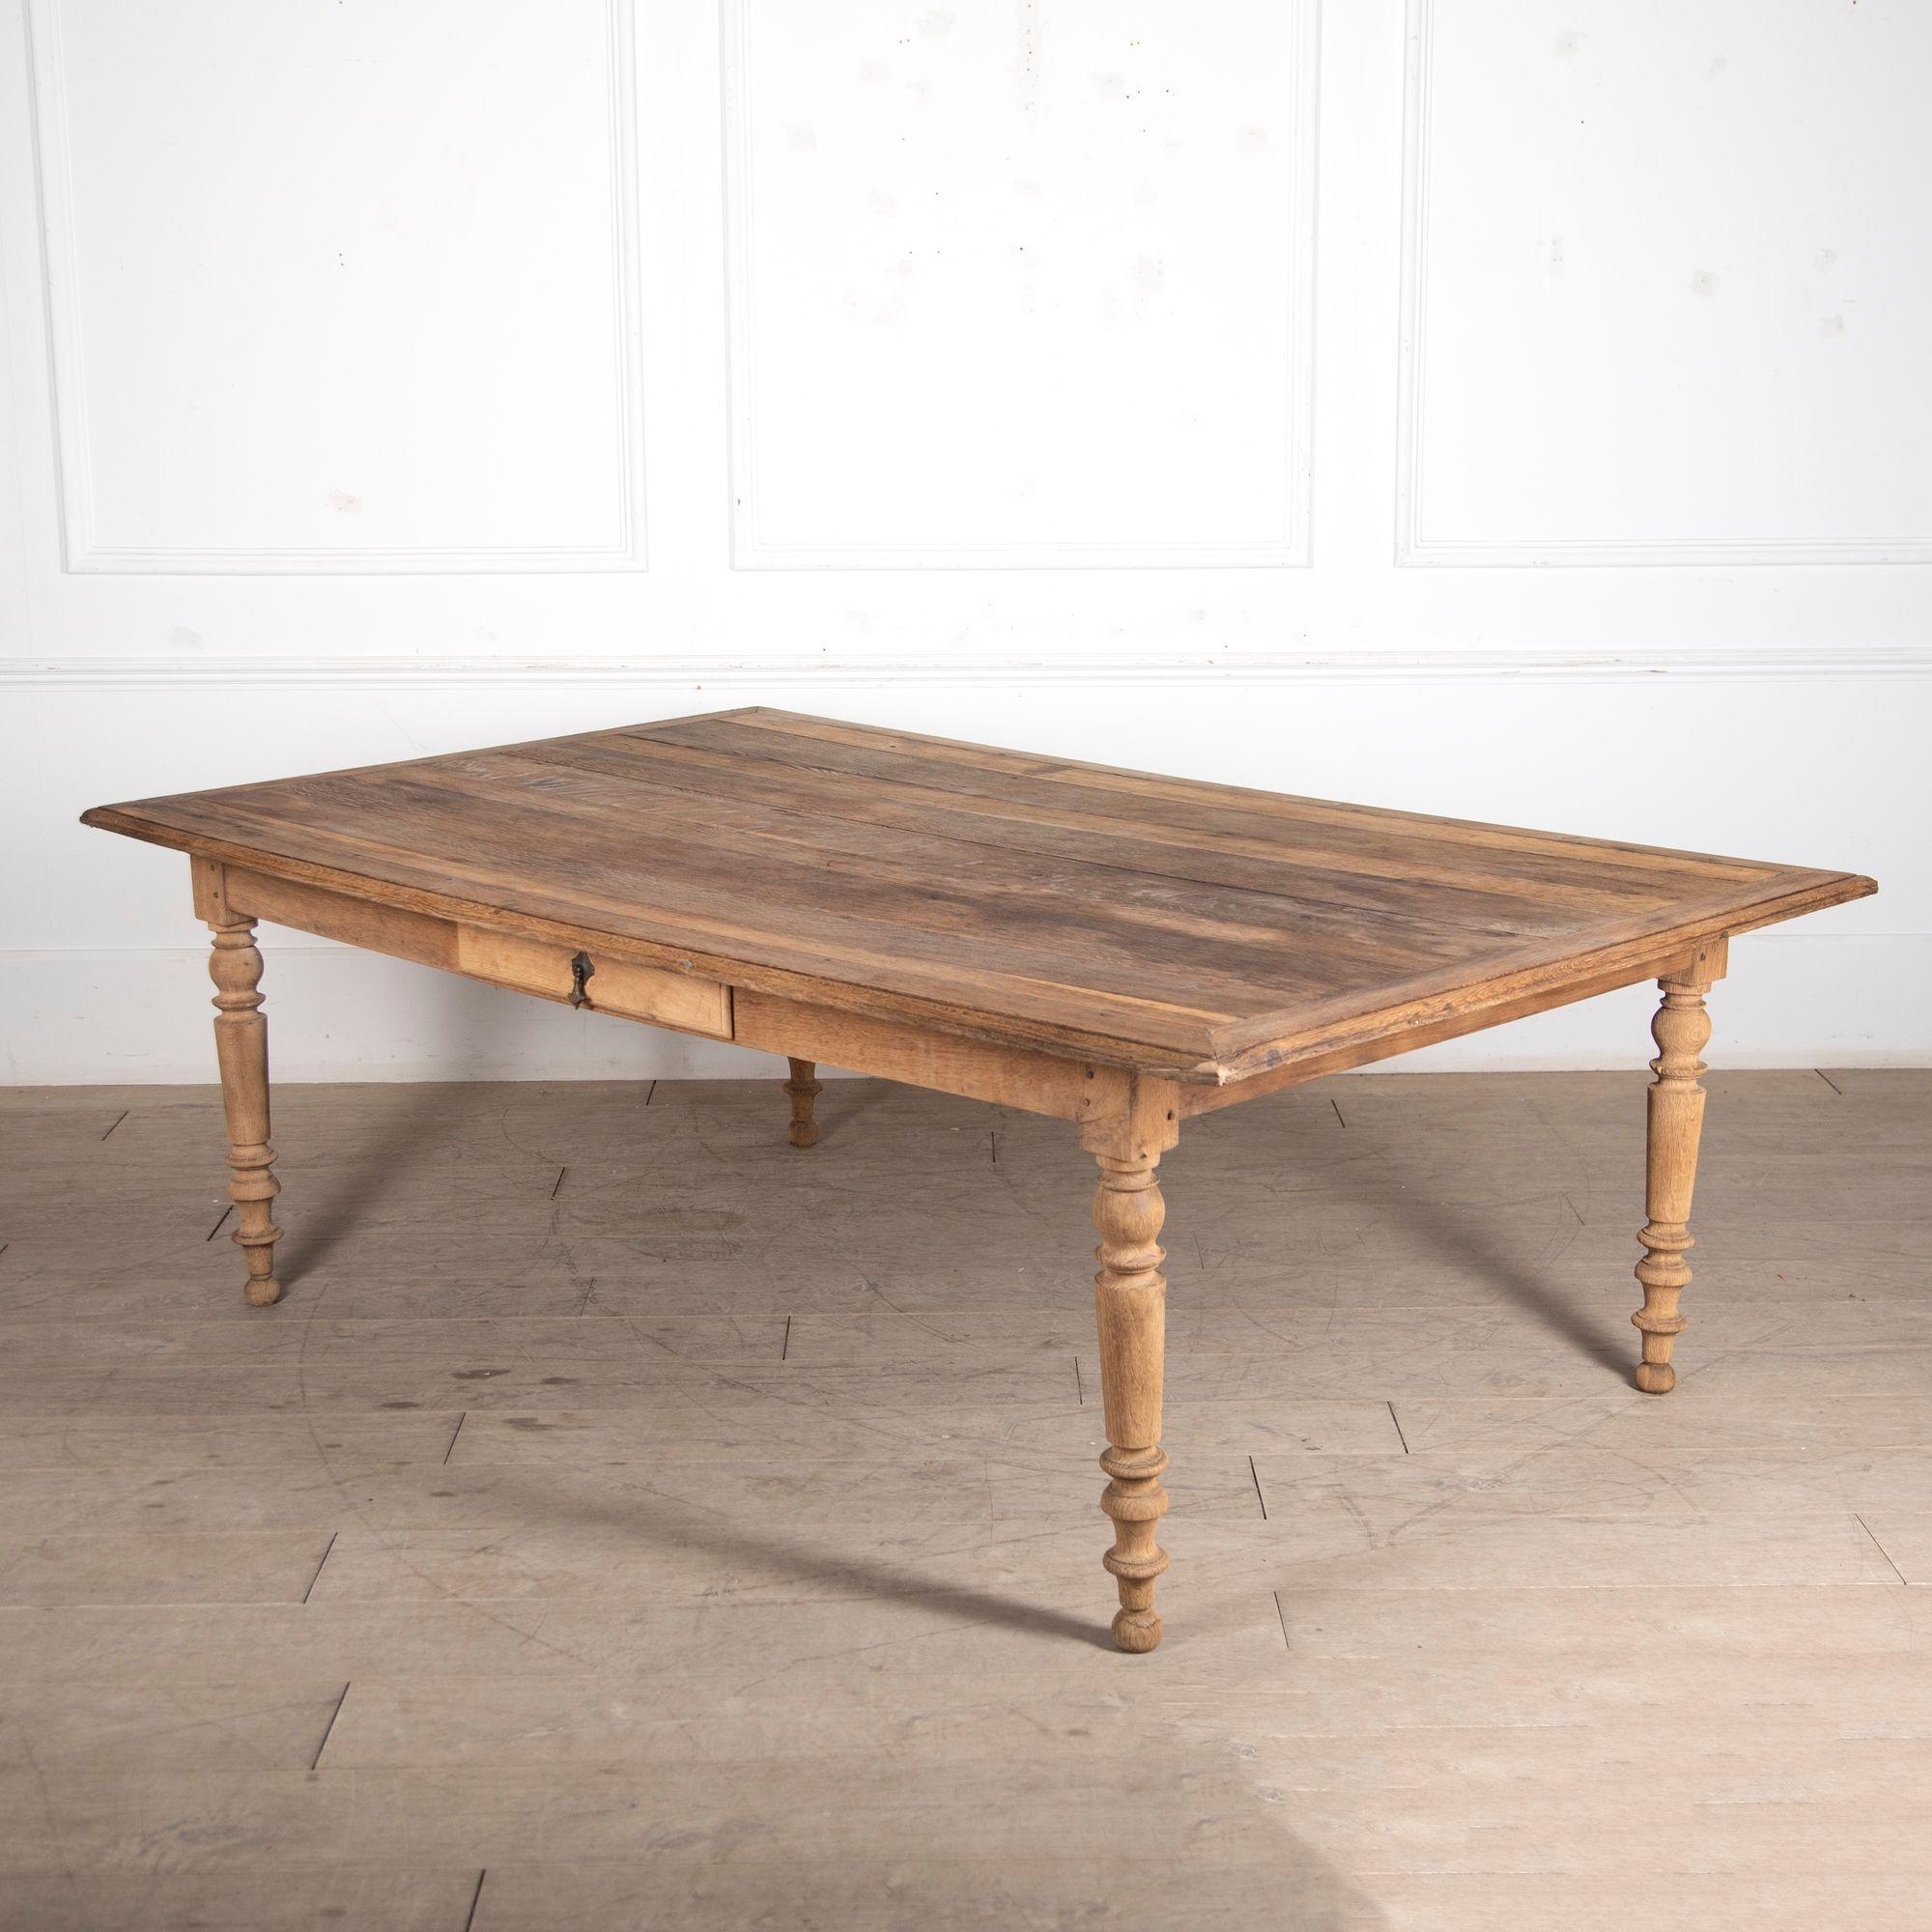 Large 19th Century French bleached industrial oak dining table.
The proportions allow two diners at each end as well as at least four on either side. Containing two drawers.
Circa 1890.